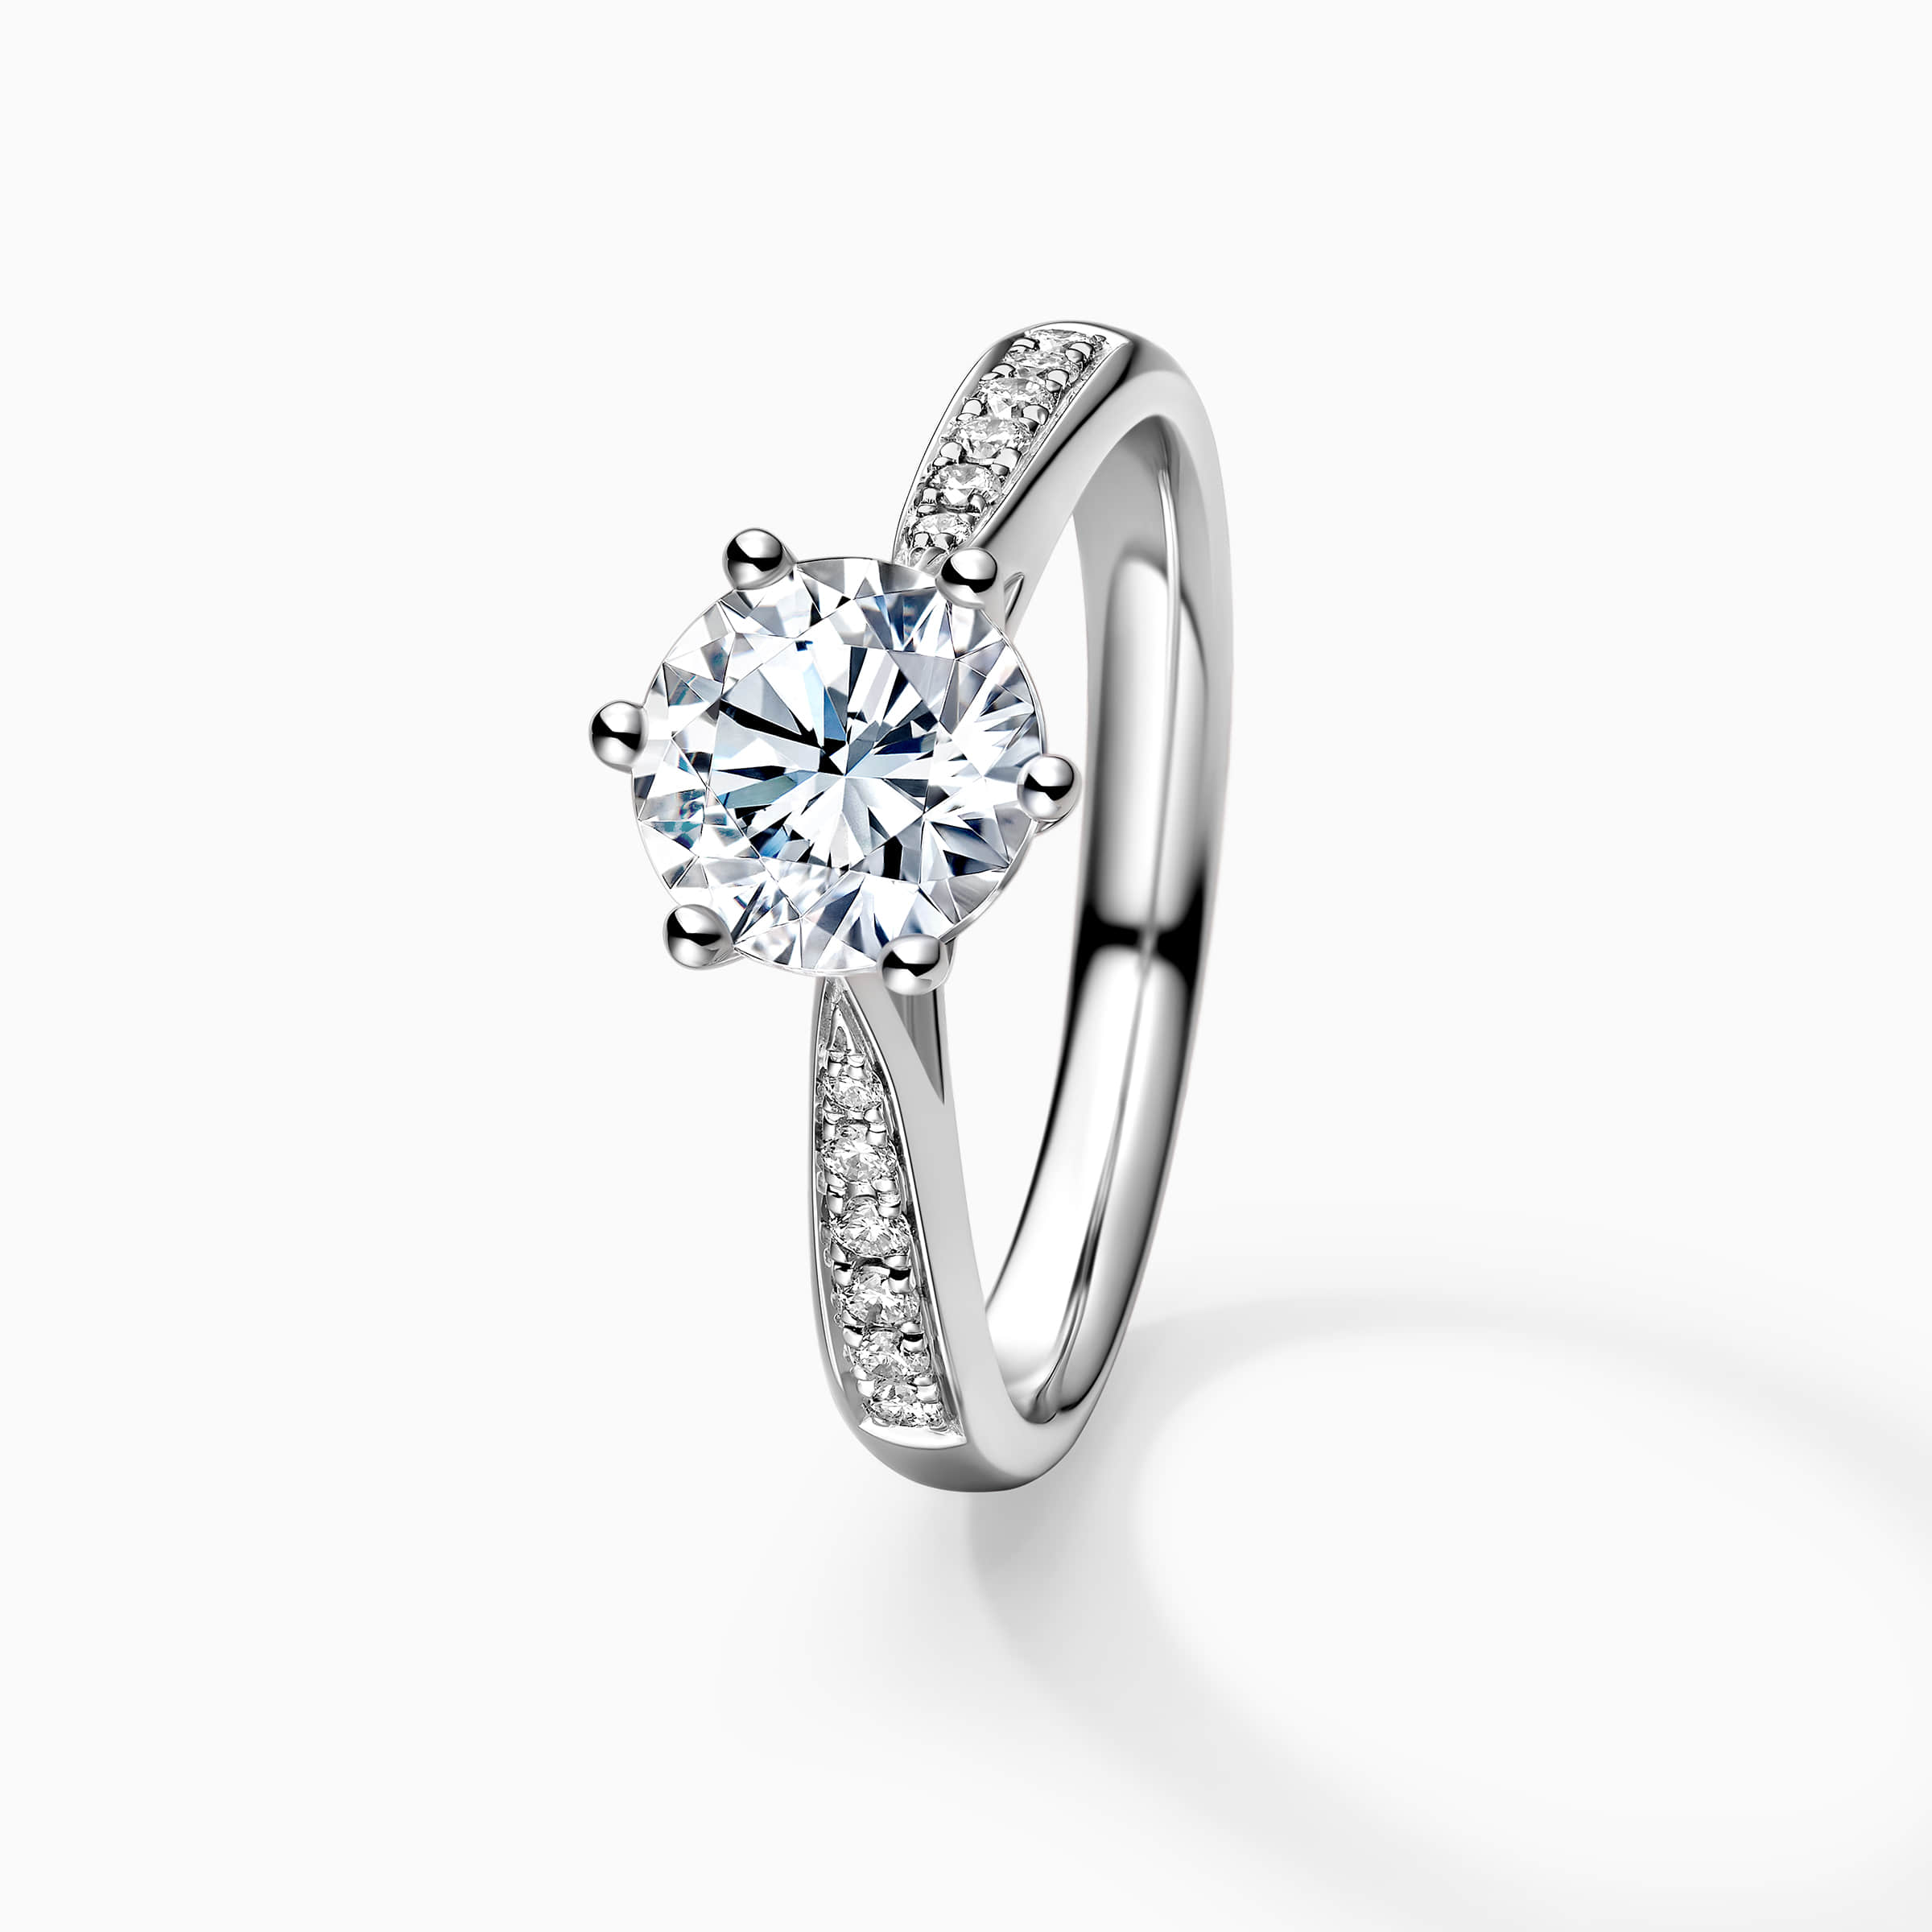 Darry Ring 6 prong engagement ring